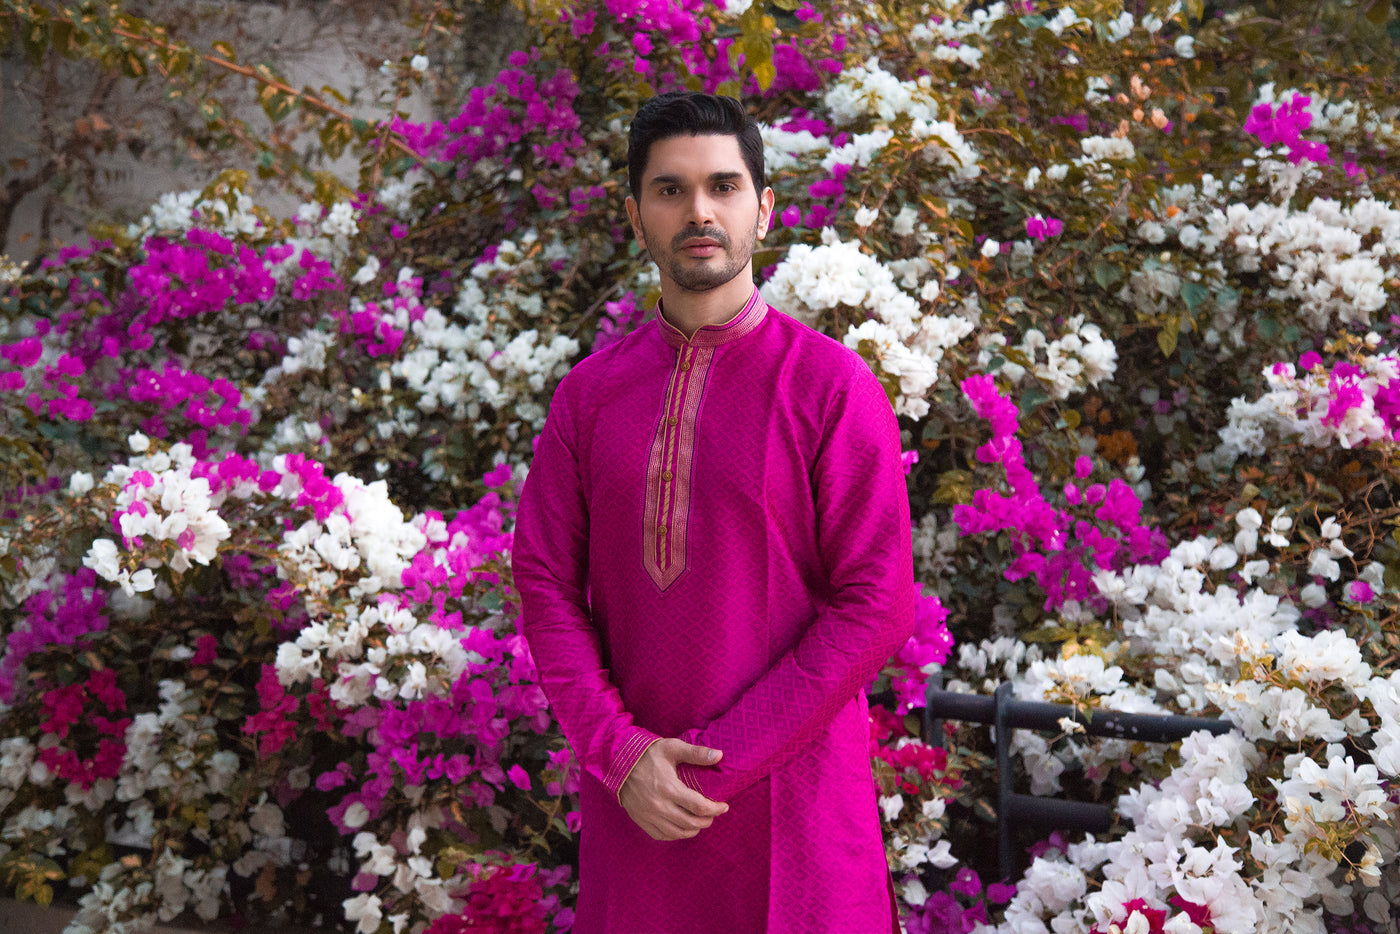 Magenta Embroidered Kurta Set Indian Clothing in Denver, CO, Aurora, CO, Boulder, CO, Fort Collins, CO, Colorado Springs, CO, Parker, CO, Highlands Ranch, CO, Cherry Creek, CO, Centennial, CO, and Longmont, CO. NATIONWIDE SHIPPING USA- India Fashion X